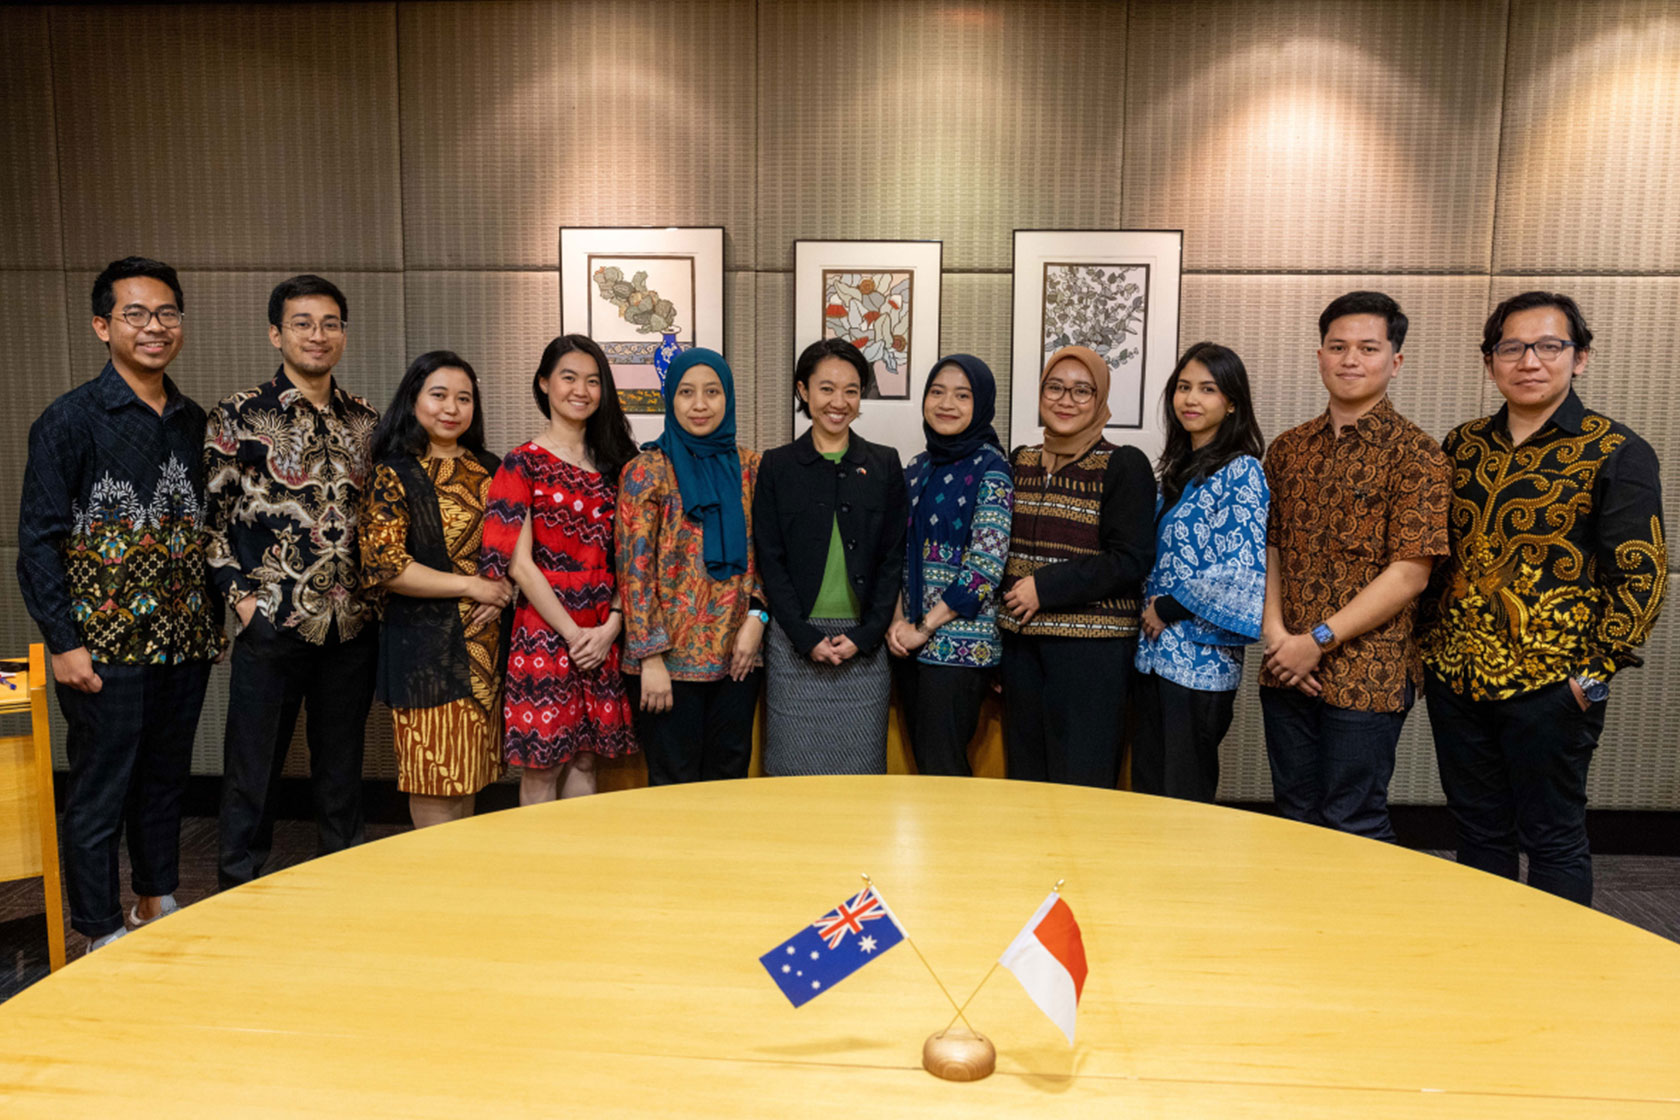 A group photo with Ms Michelle Chan, DFAT’s Deputy Secretary for Southeast Asia and Global Partnerships.